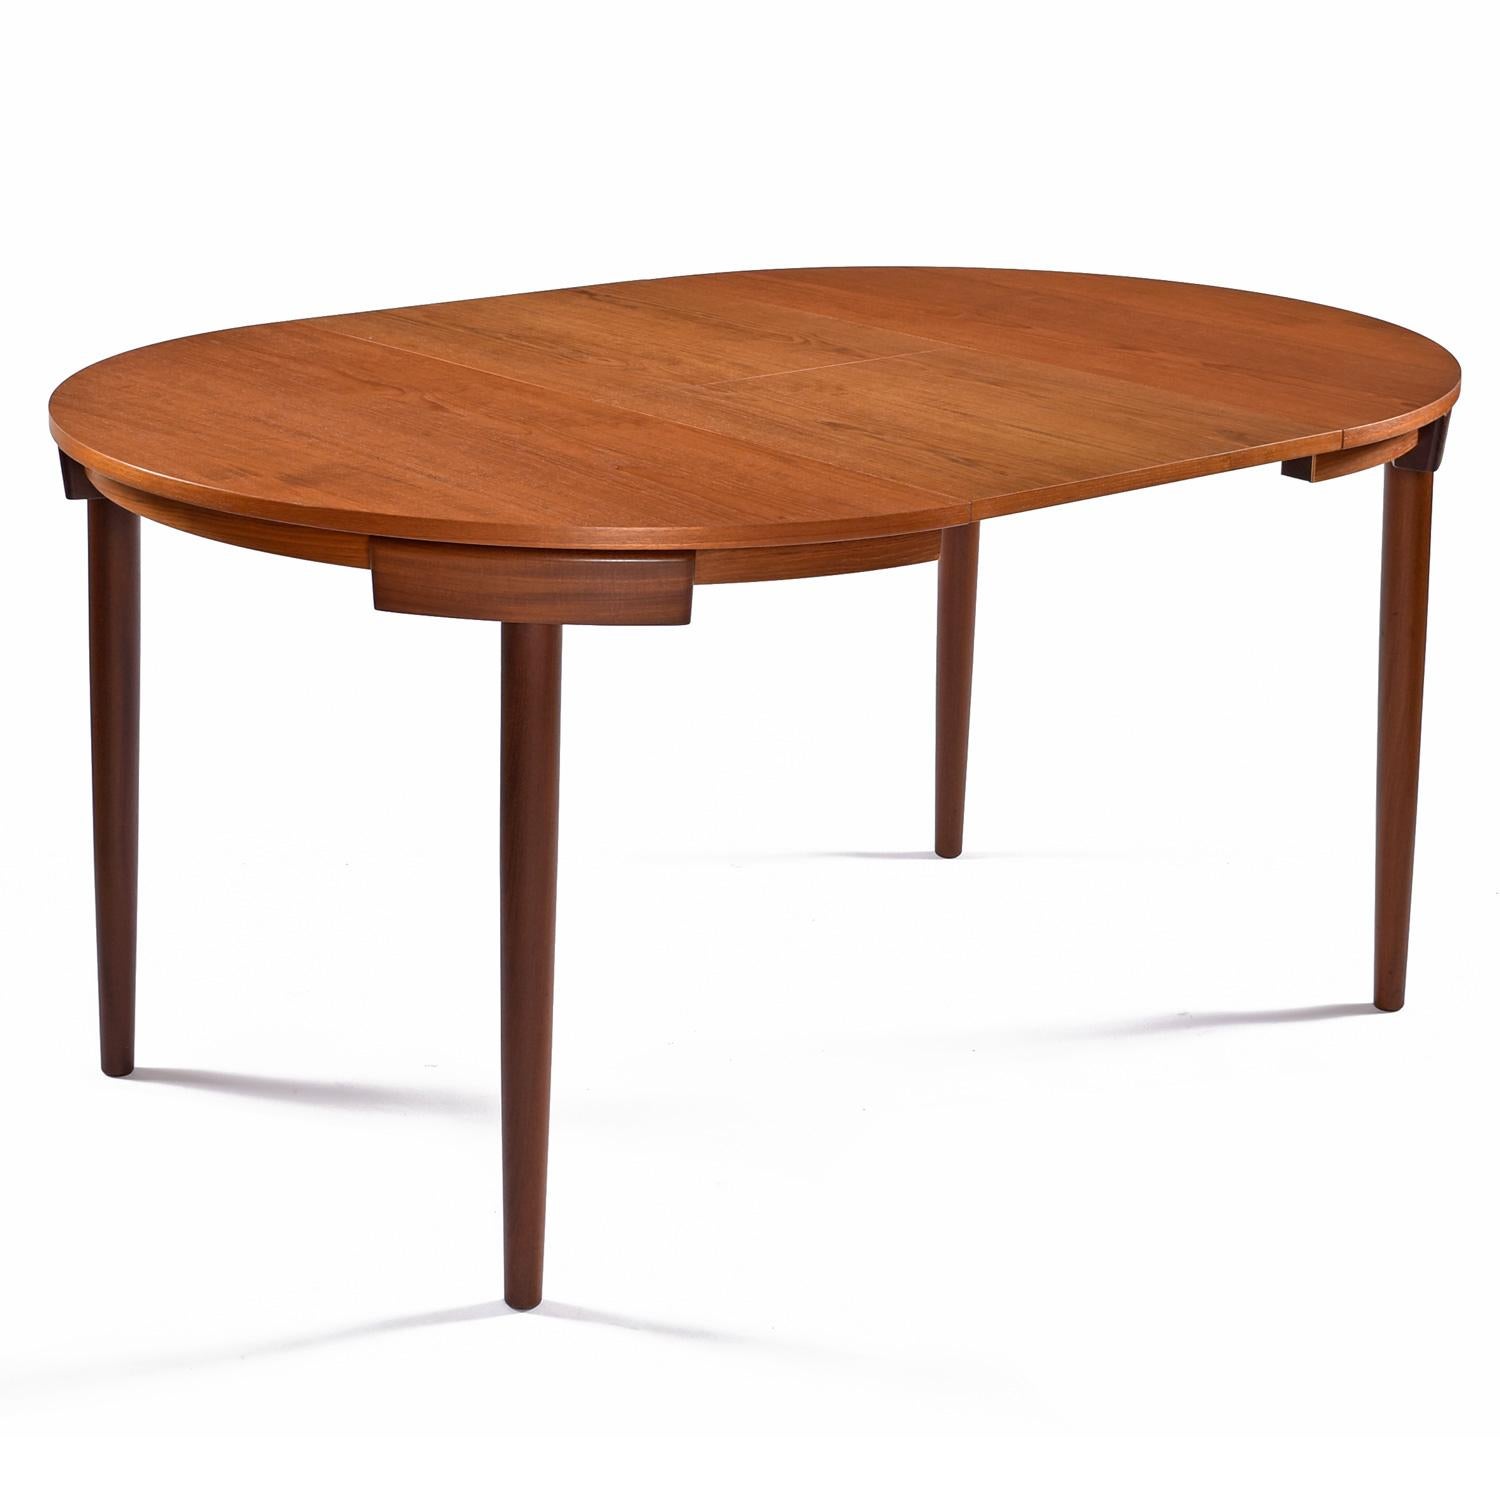 Danish Hans Olsen for Frem Rojle Roundette Butterfly Leaf Dining Table and '6' Chairs